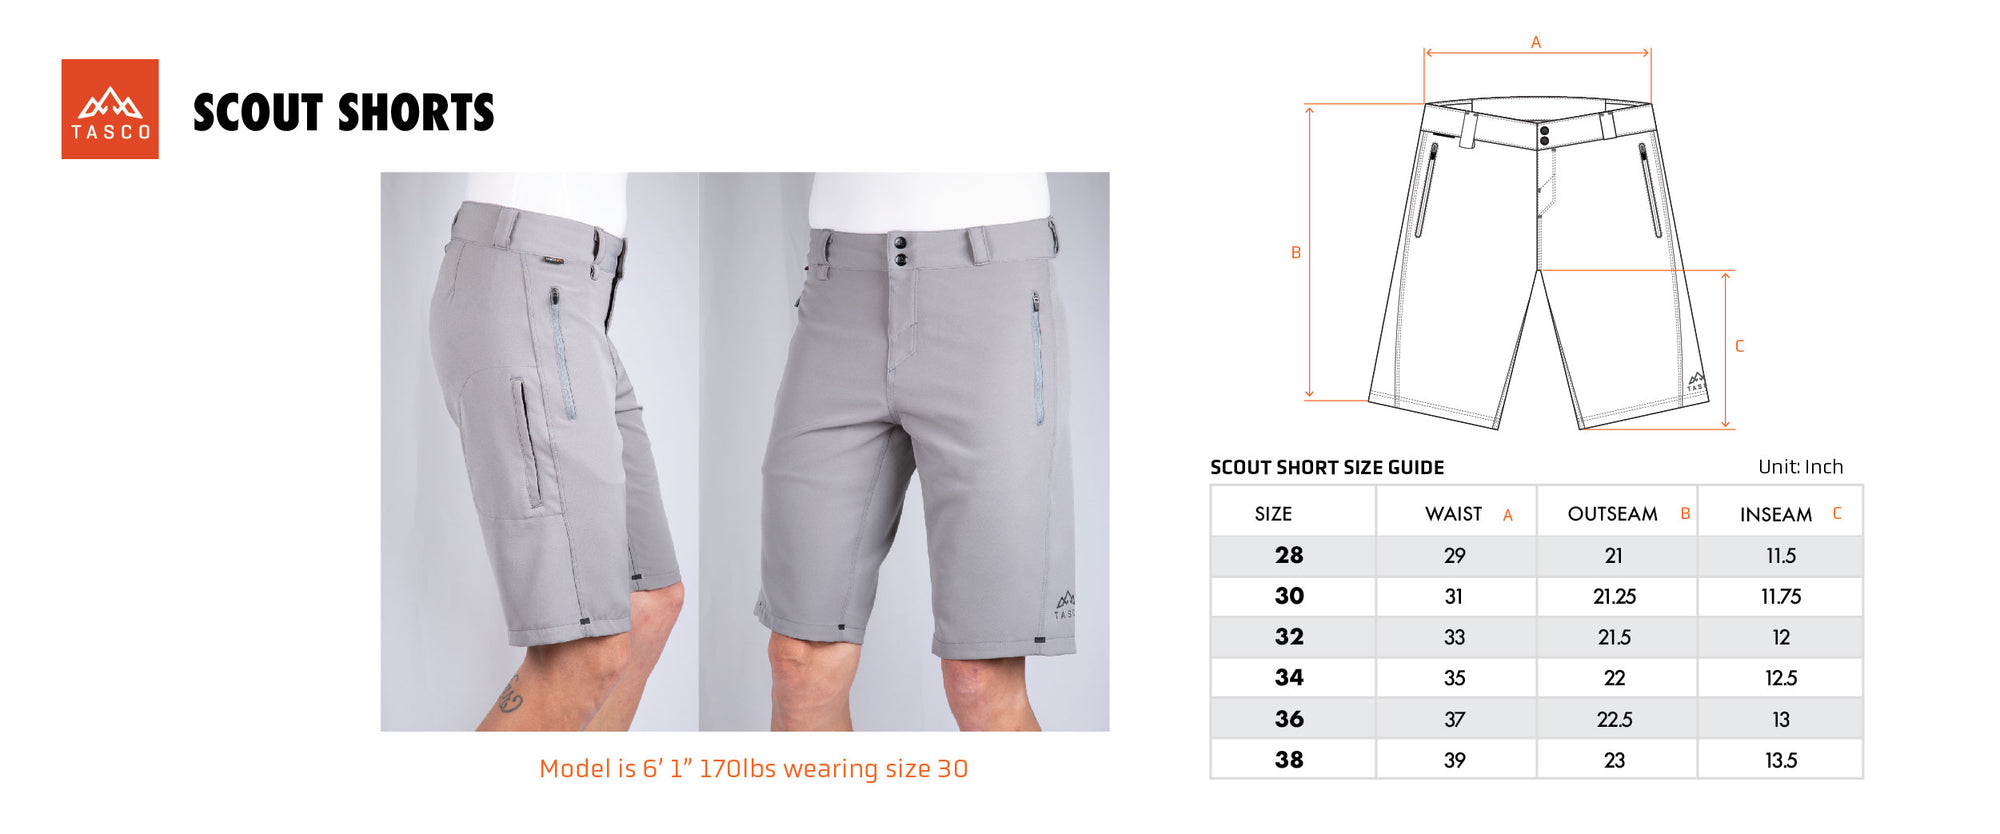 Scout Shorts Size Chart. Find your fit and hop on the MTB for some exploration!